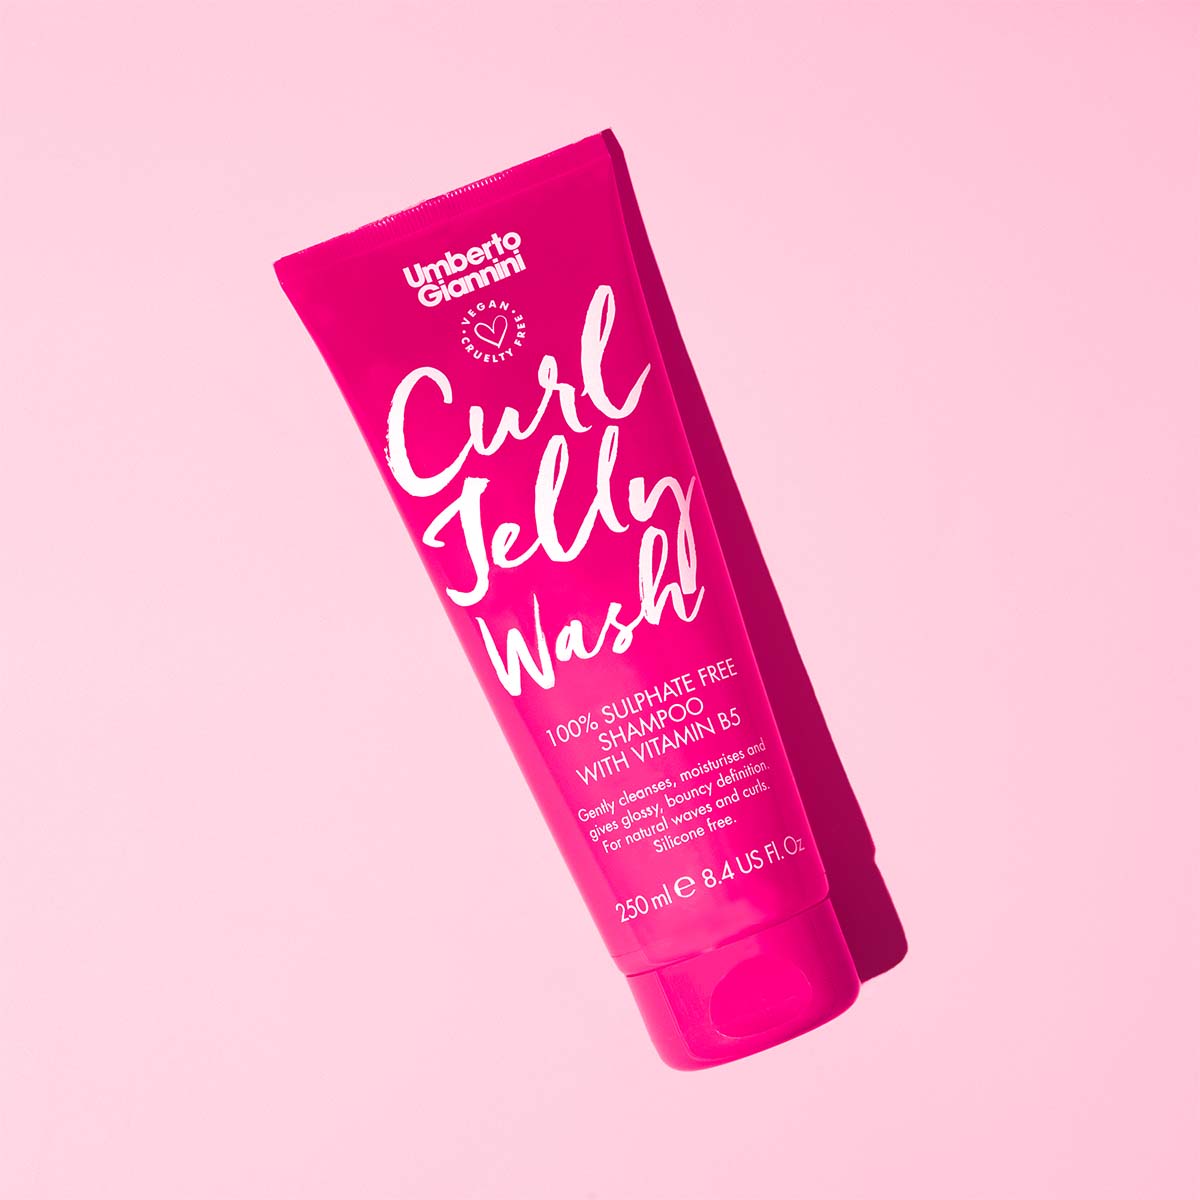 Curl Jelly Wash - Sulphate Free Shampoo